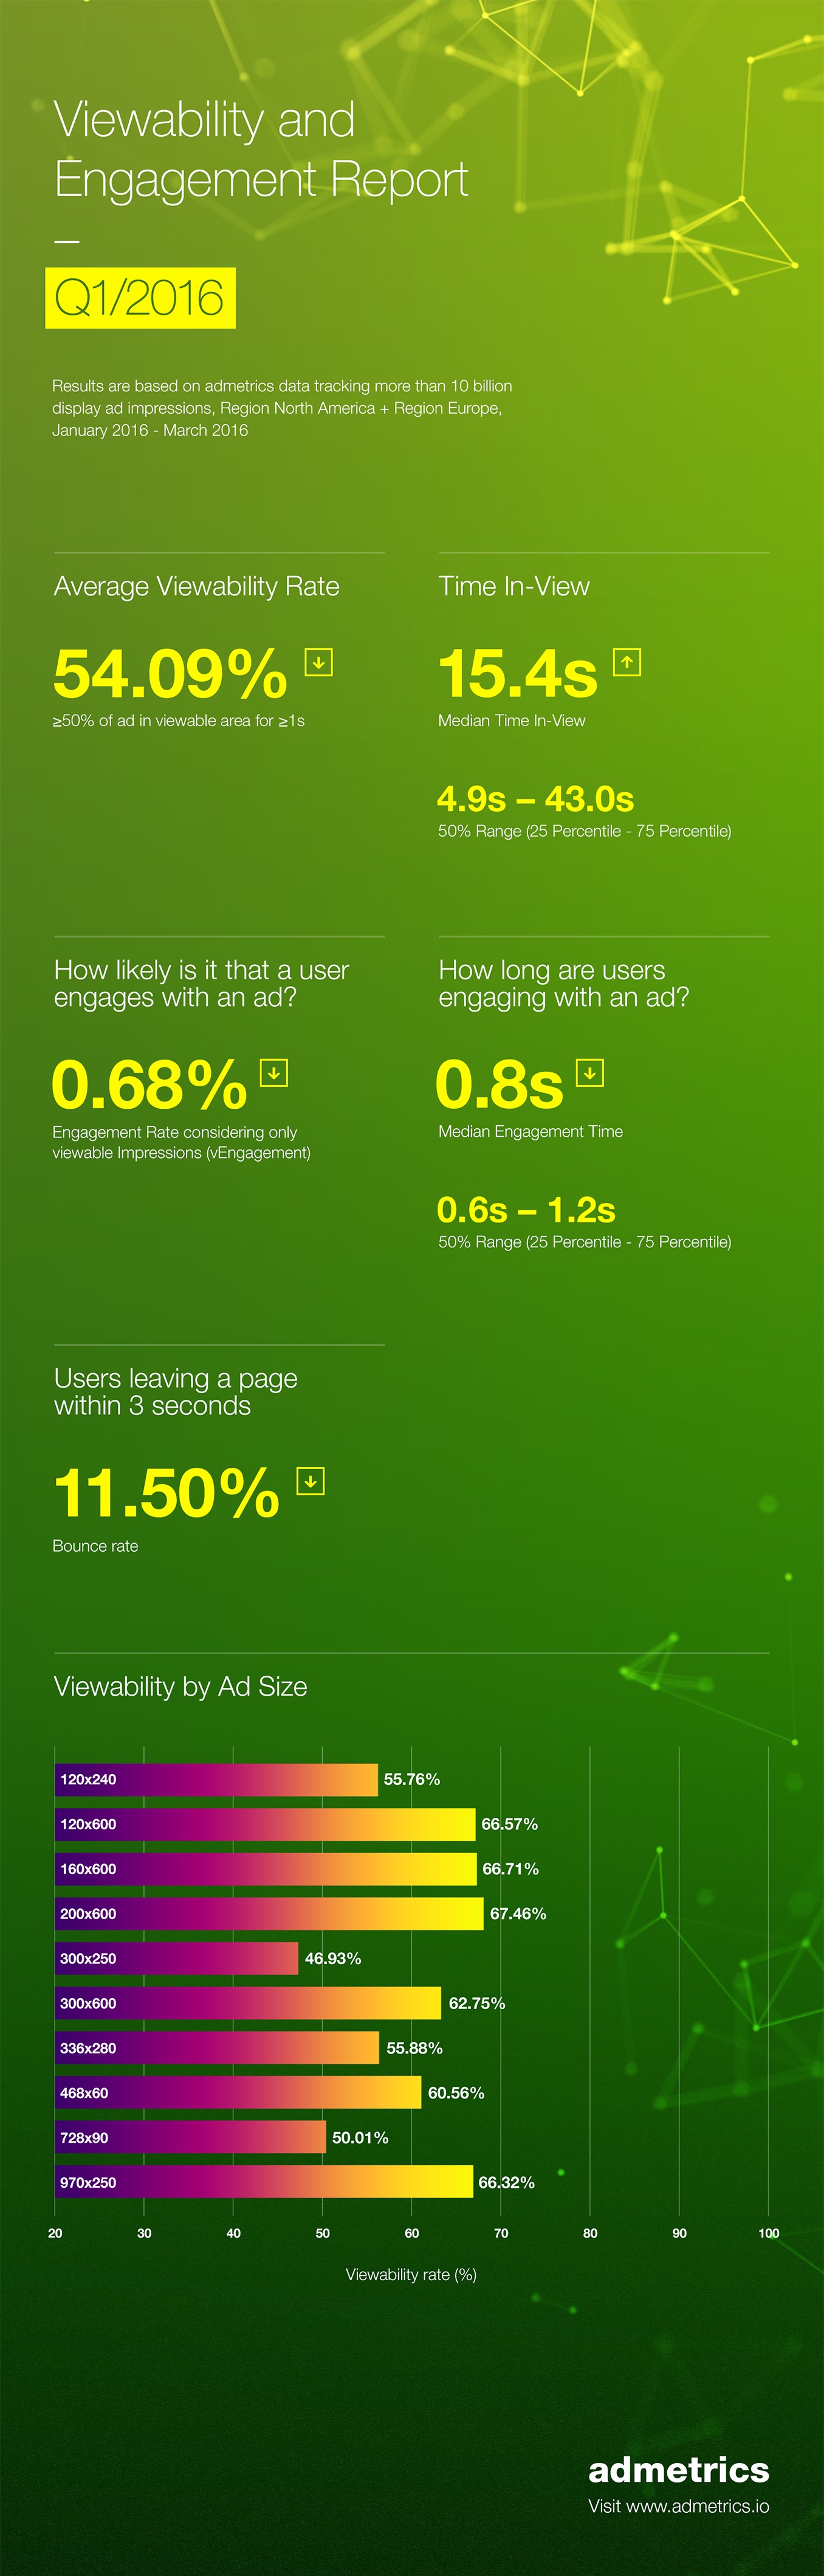 Infographic: Q1 2016 Viewability and Engagement Stats